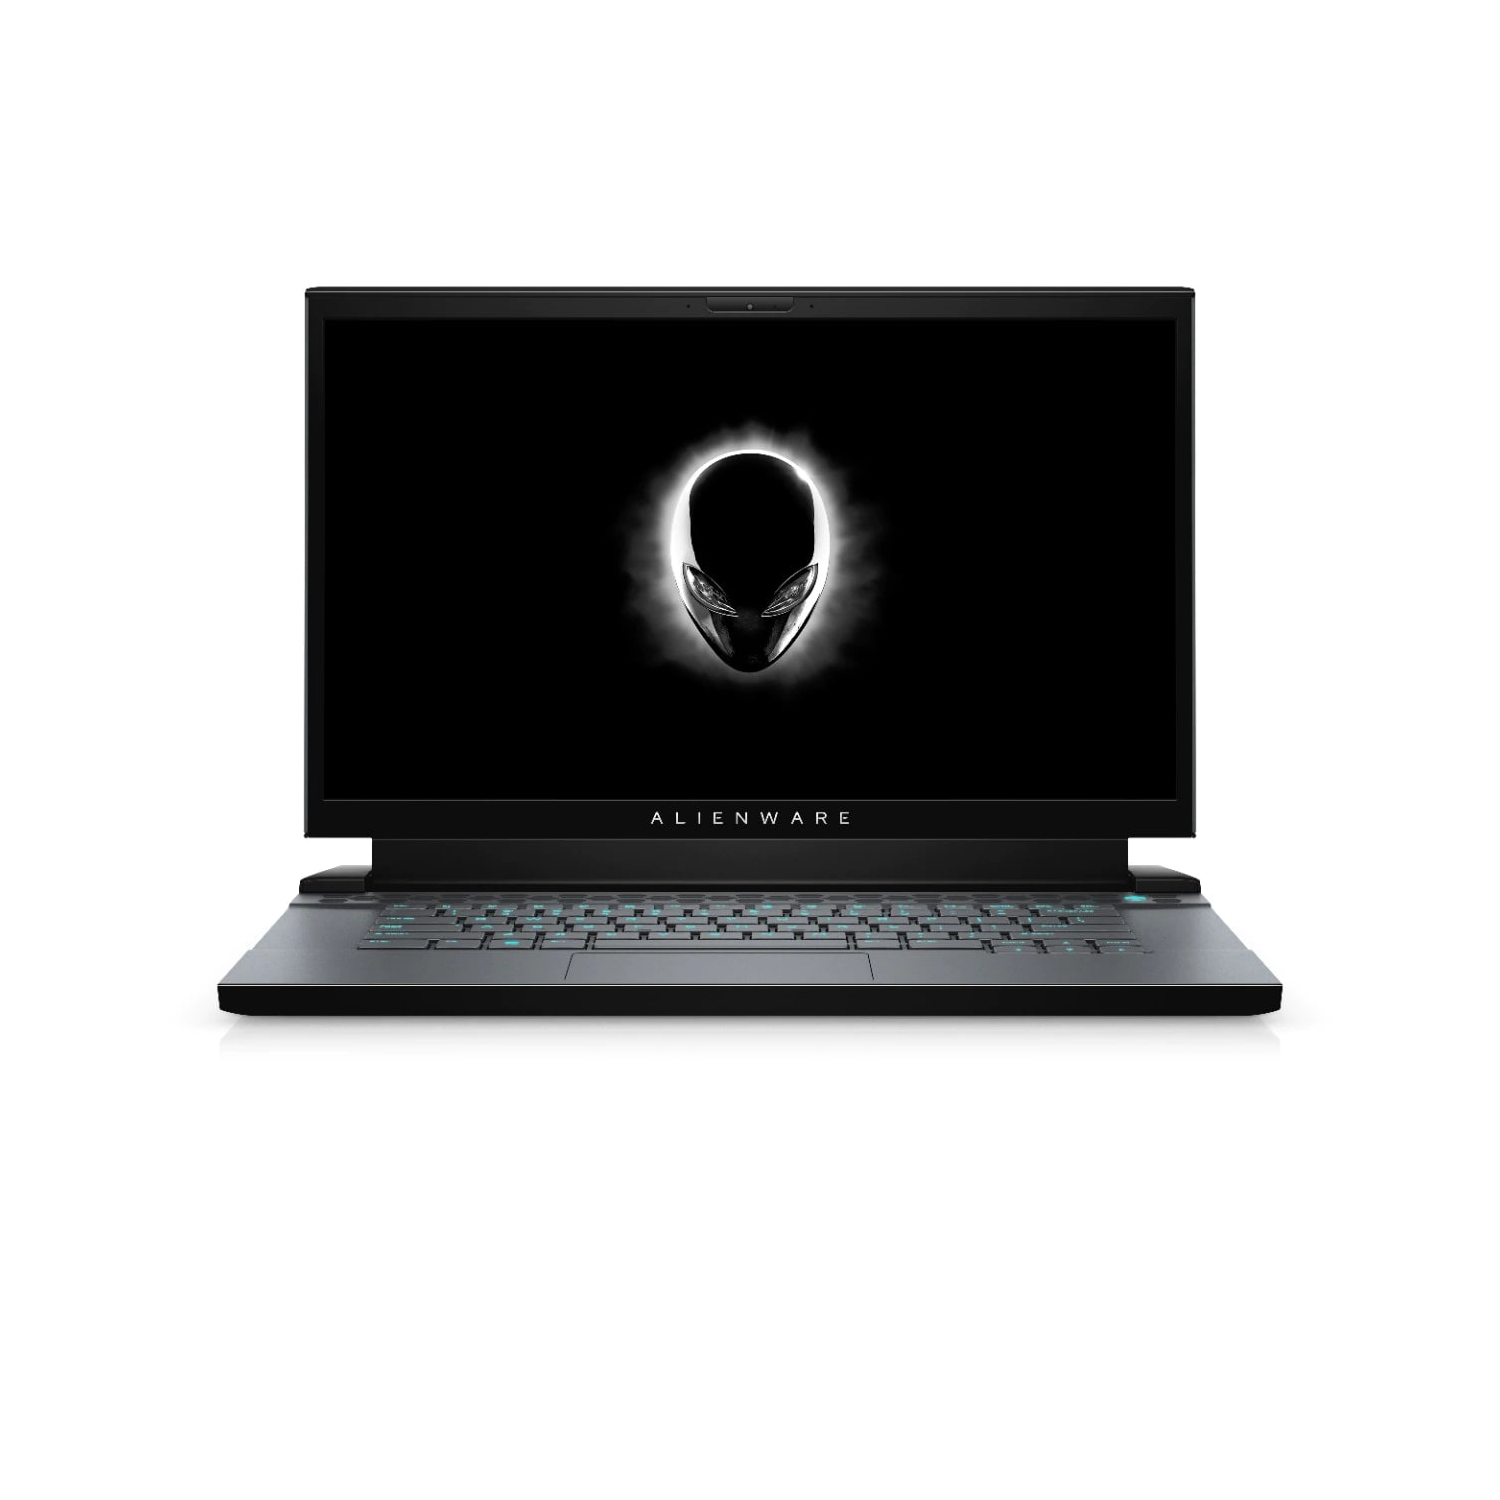 Refurbished (Excellent) - Dell Alienware m15 R2 Gaming Laptop (2019) | 15.6" FHD | Core i7 - 512GB SSD - 16GB RAM - RTX 2080 | 6 Cores @ 4.5 GHz Certified Refurbished